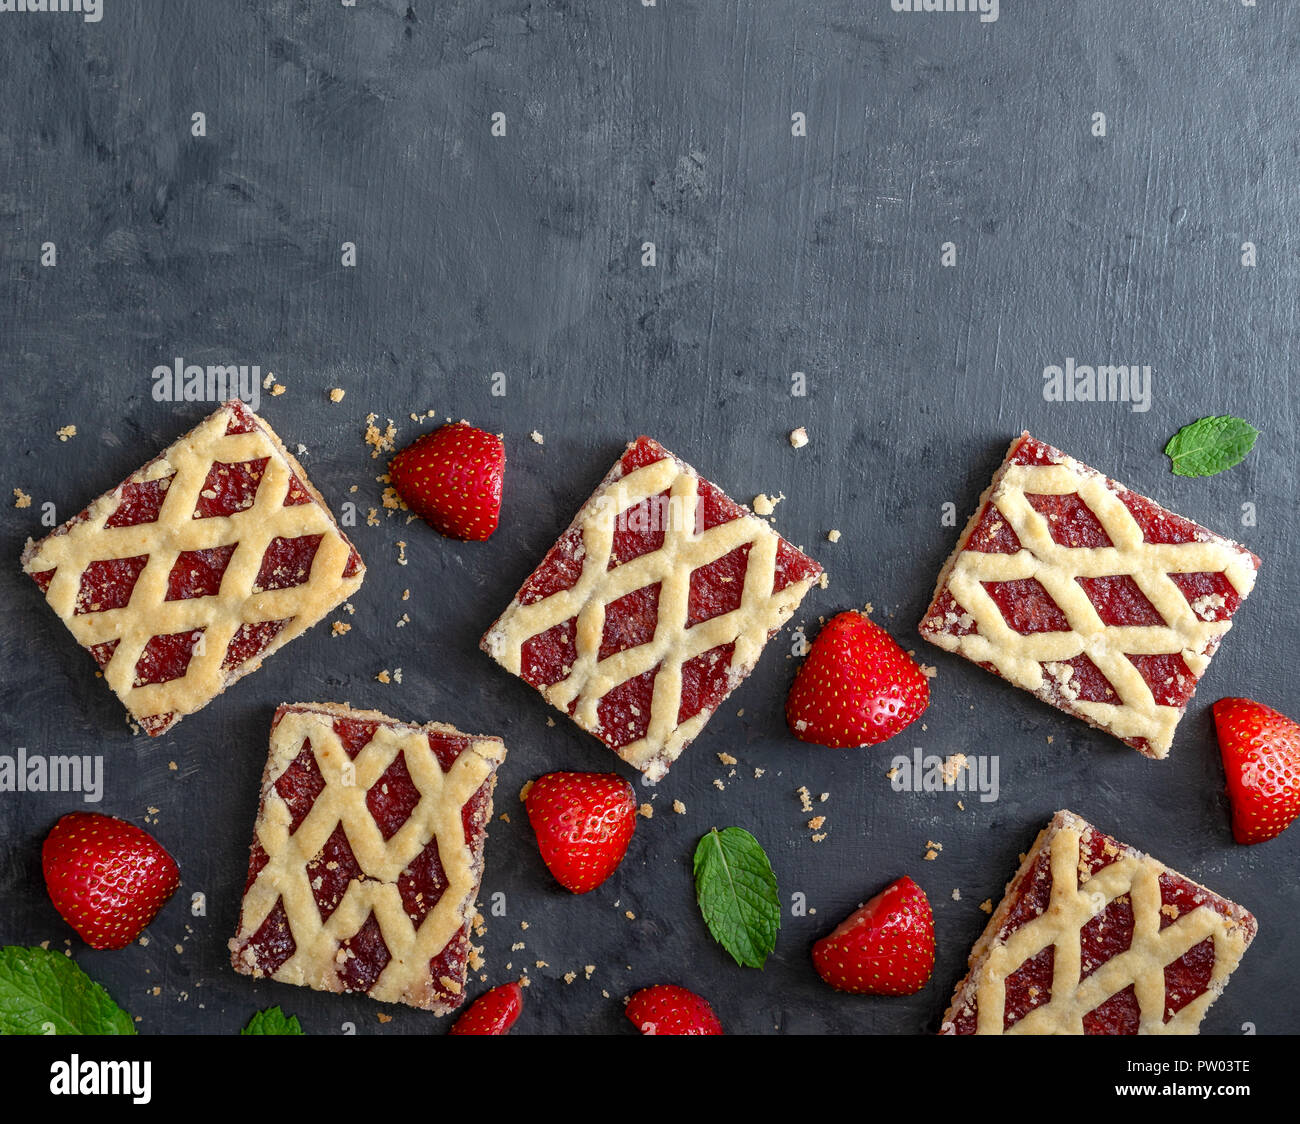 Strawberry cookies with strawberry fruits on dark background. Stock Photo